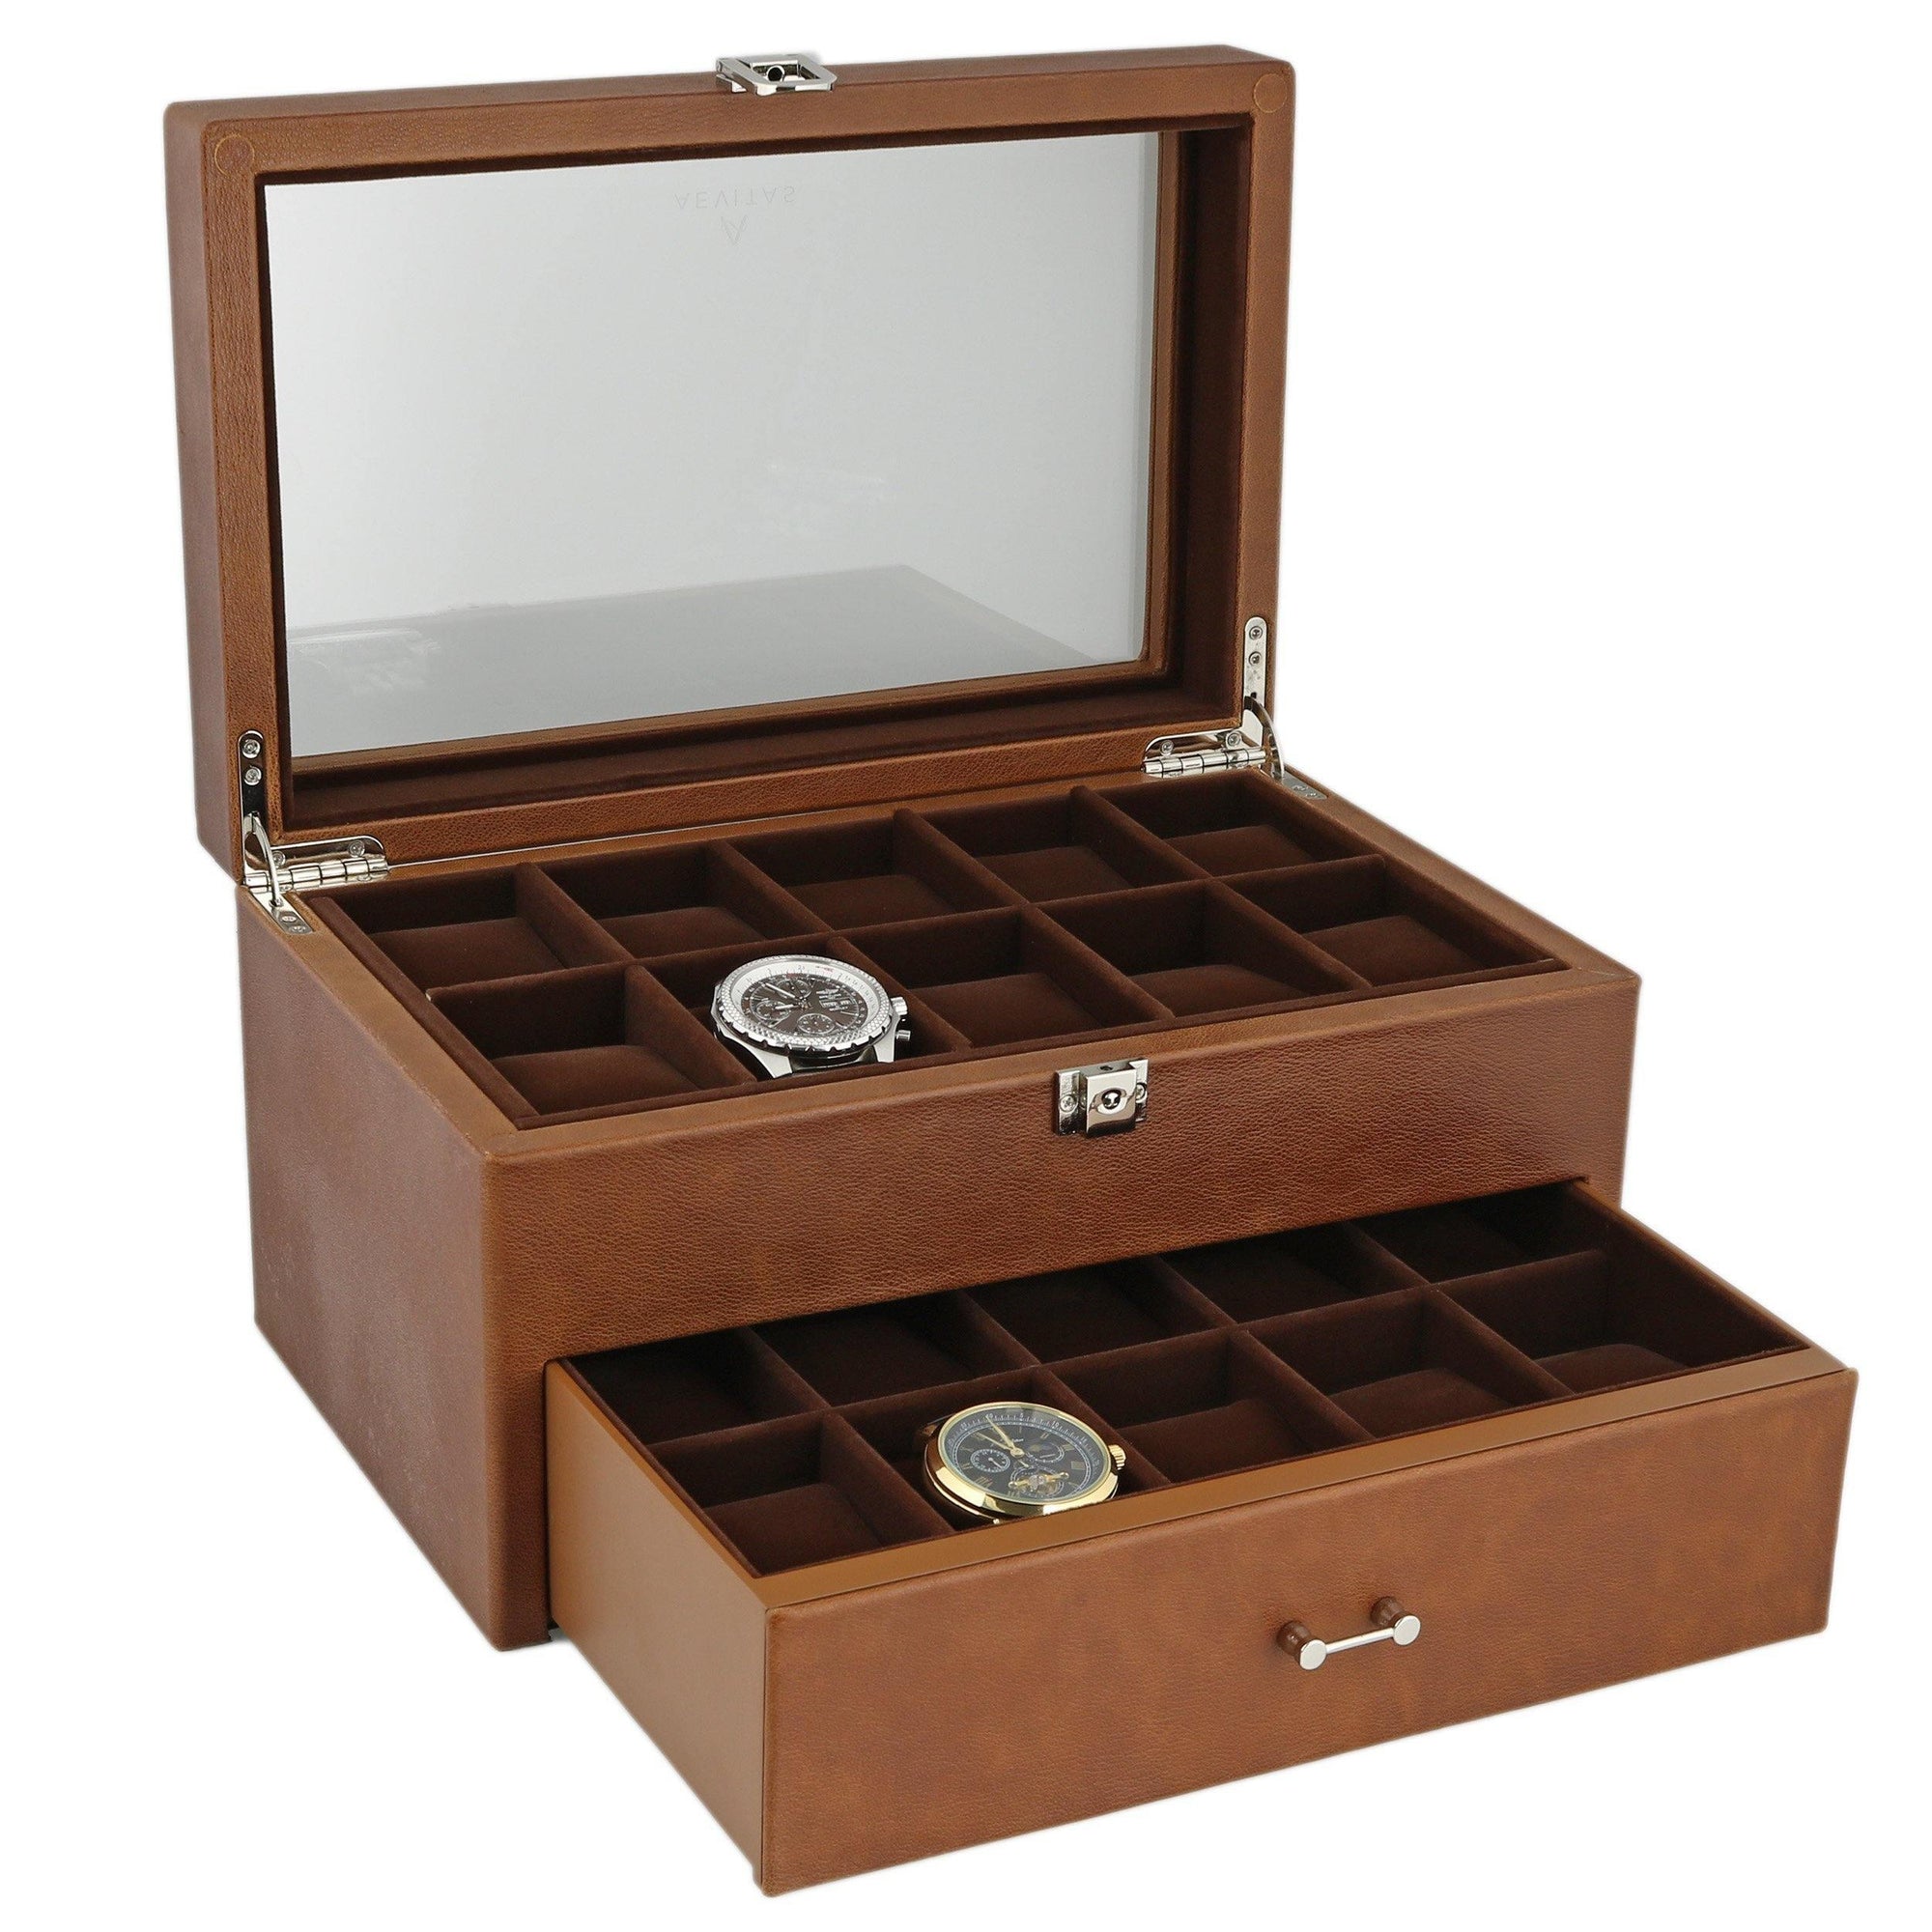 Cognac Brown Genuine Leather Watch Collectors Box with Drawer for 20 Wrist watches by Aevitas